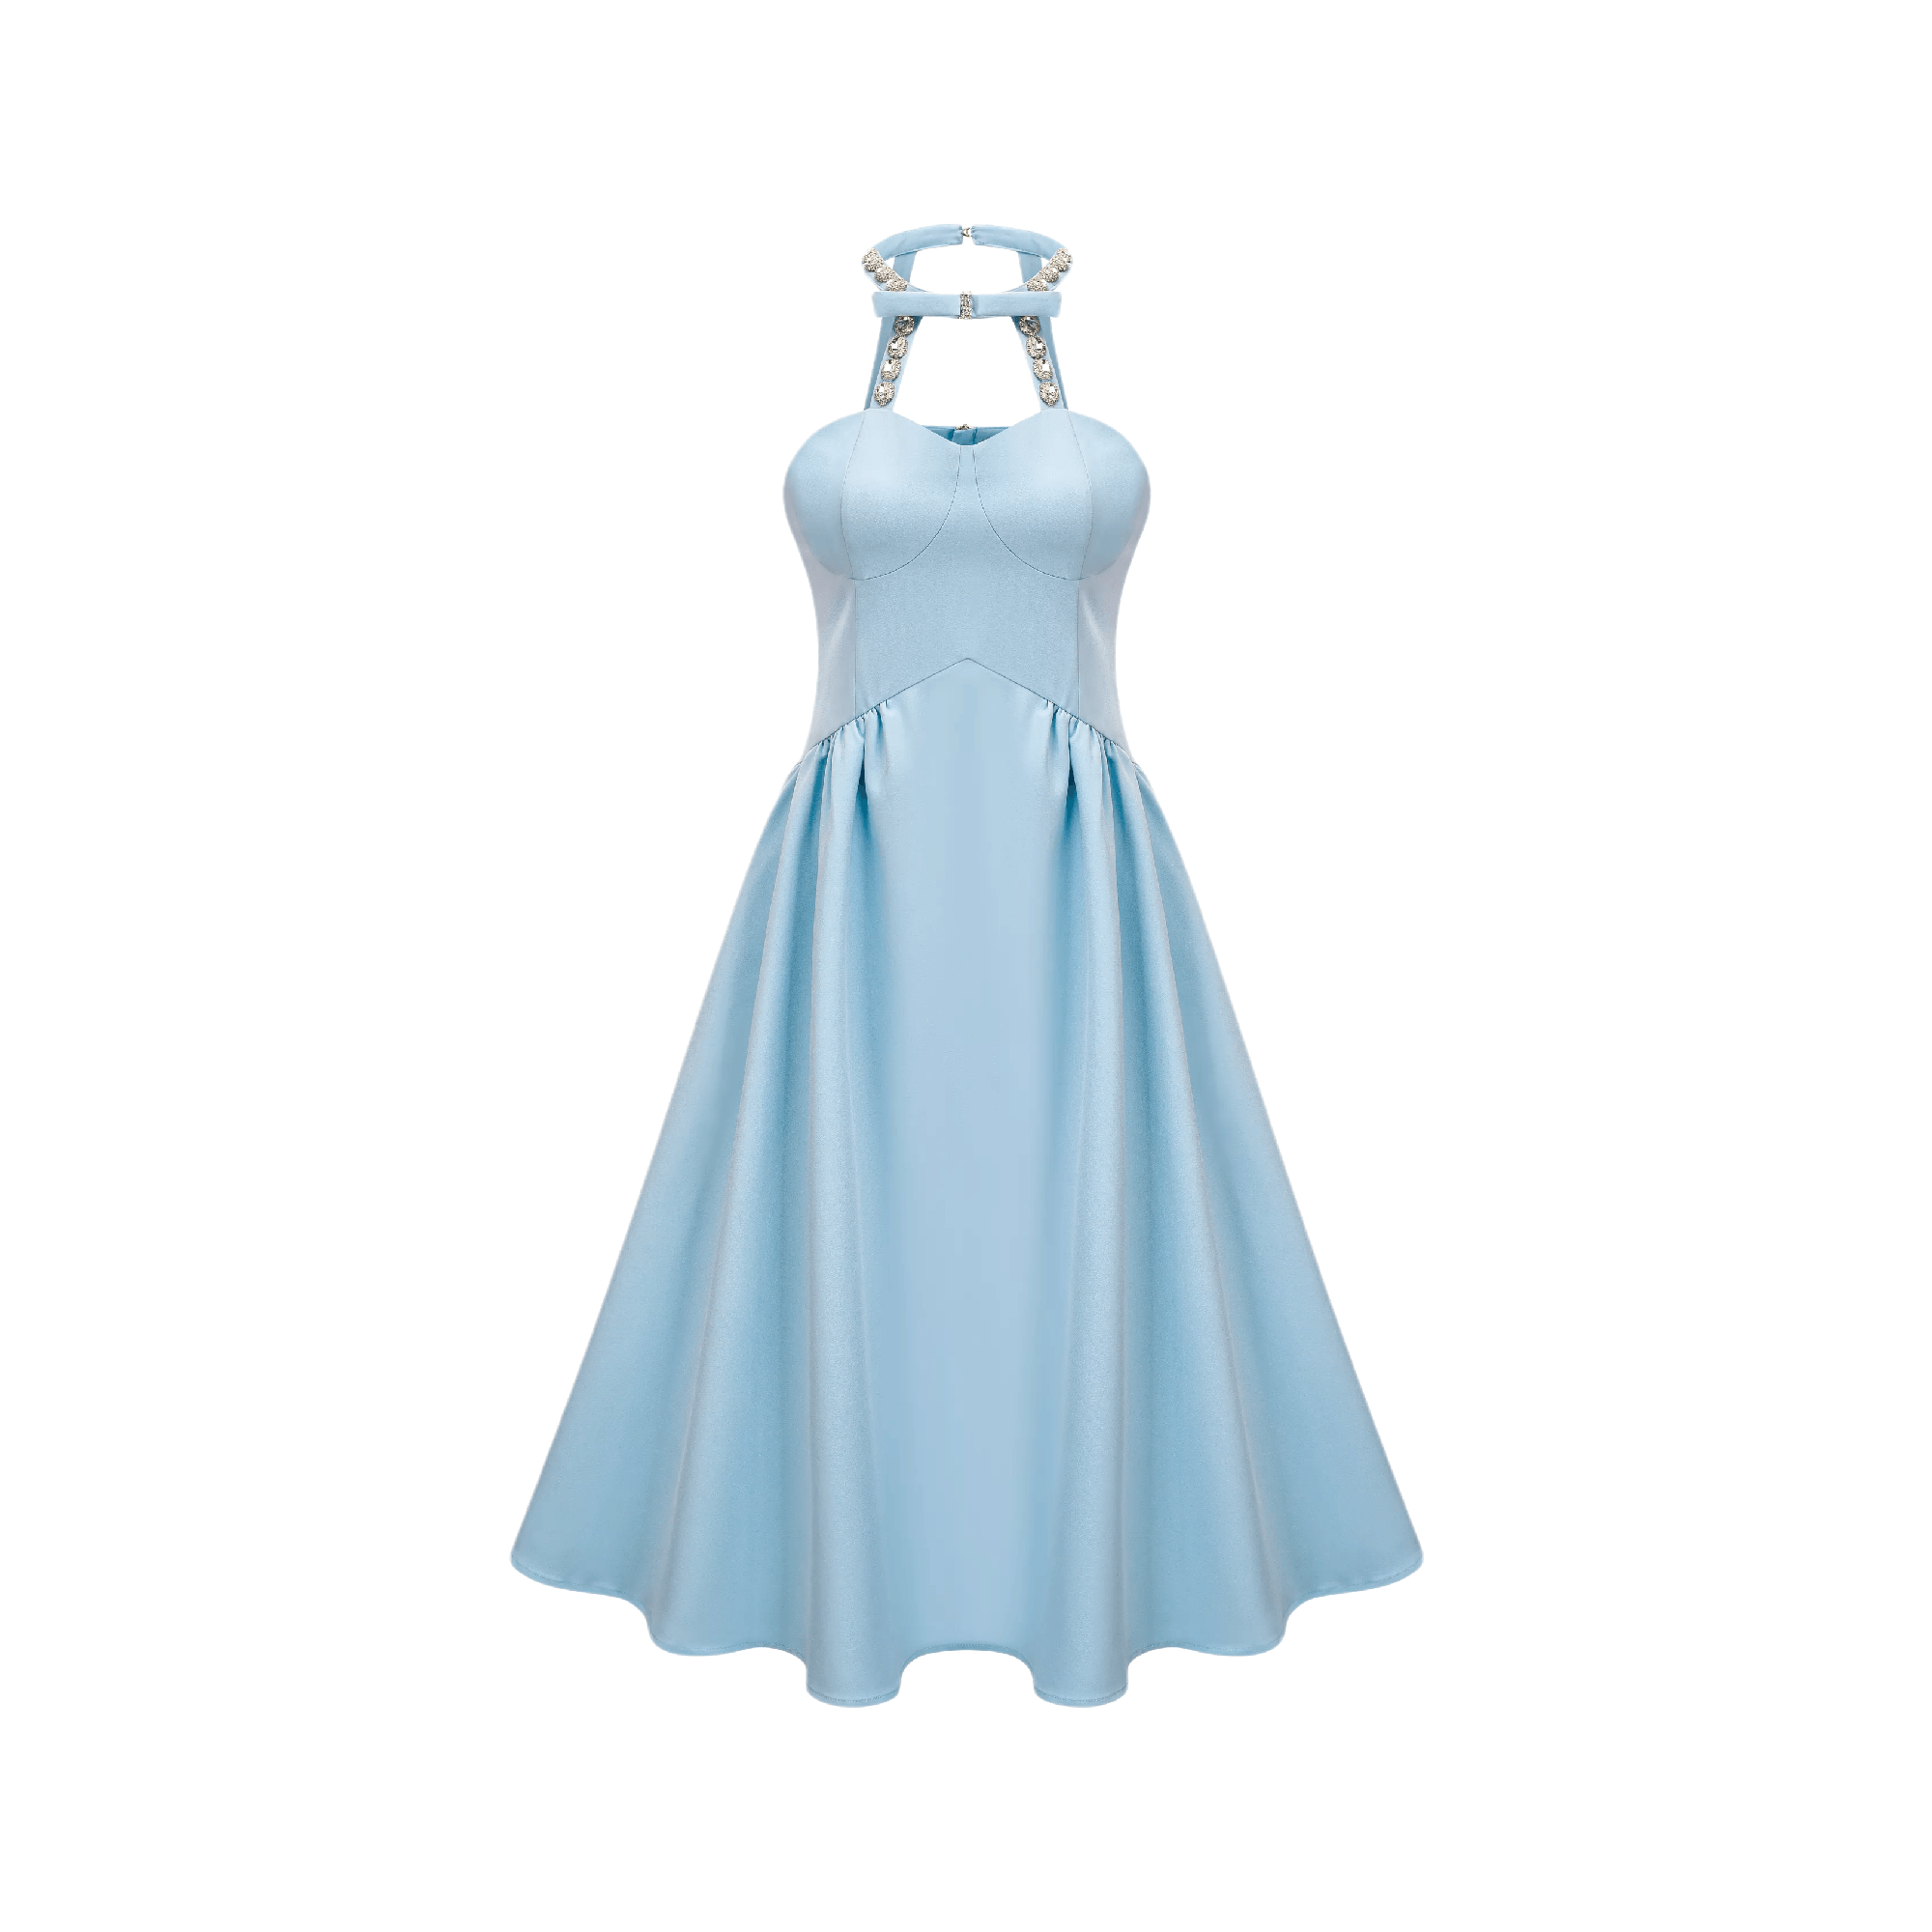 Serio Ludere-crystal-embellished princess dress (Editor's Pick) - itsy, it‘s different